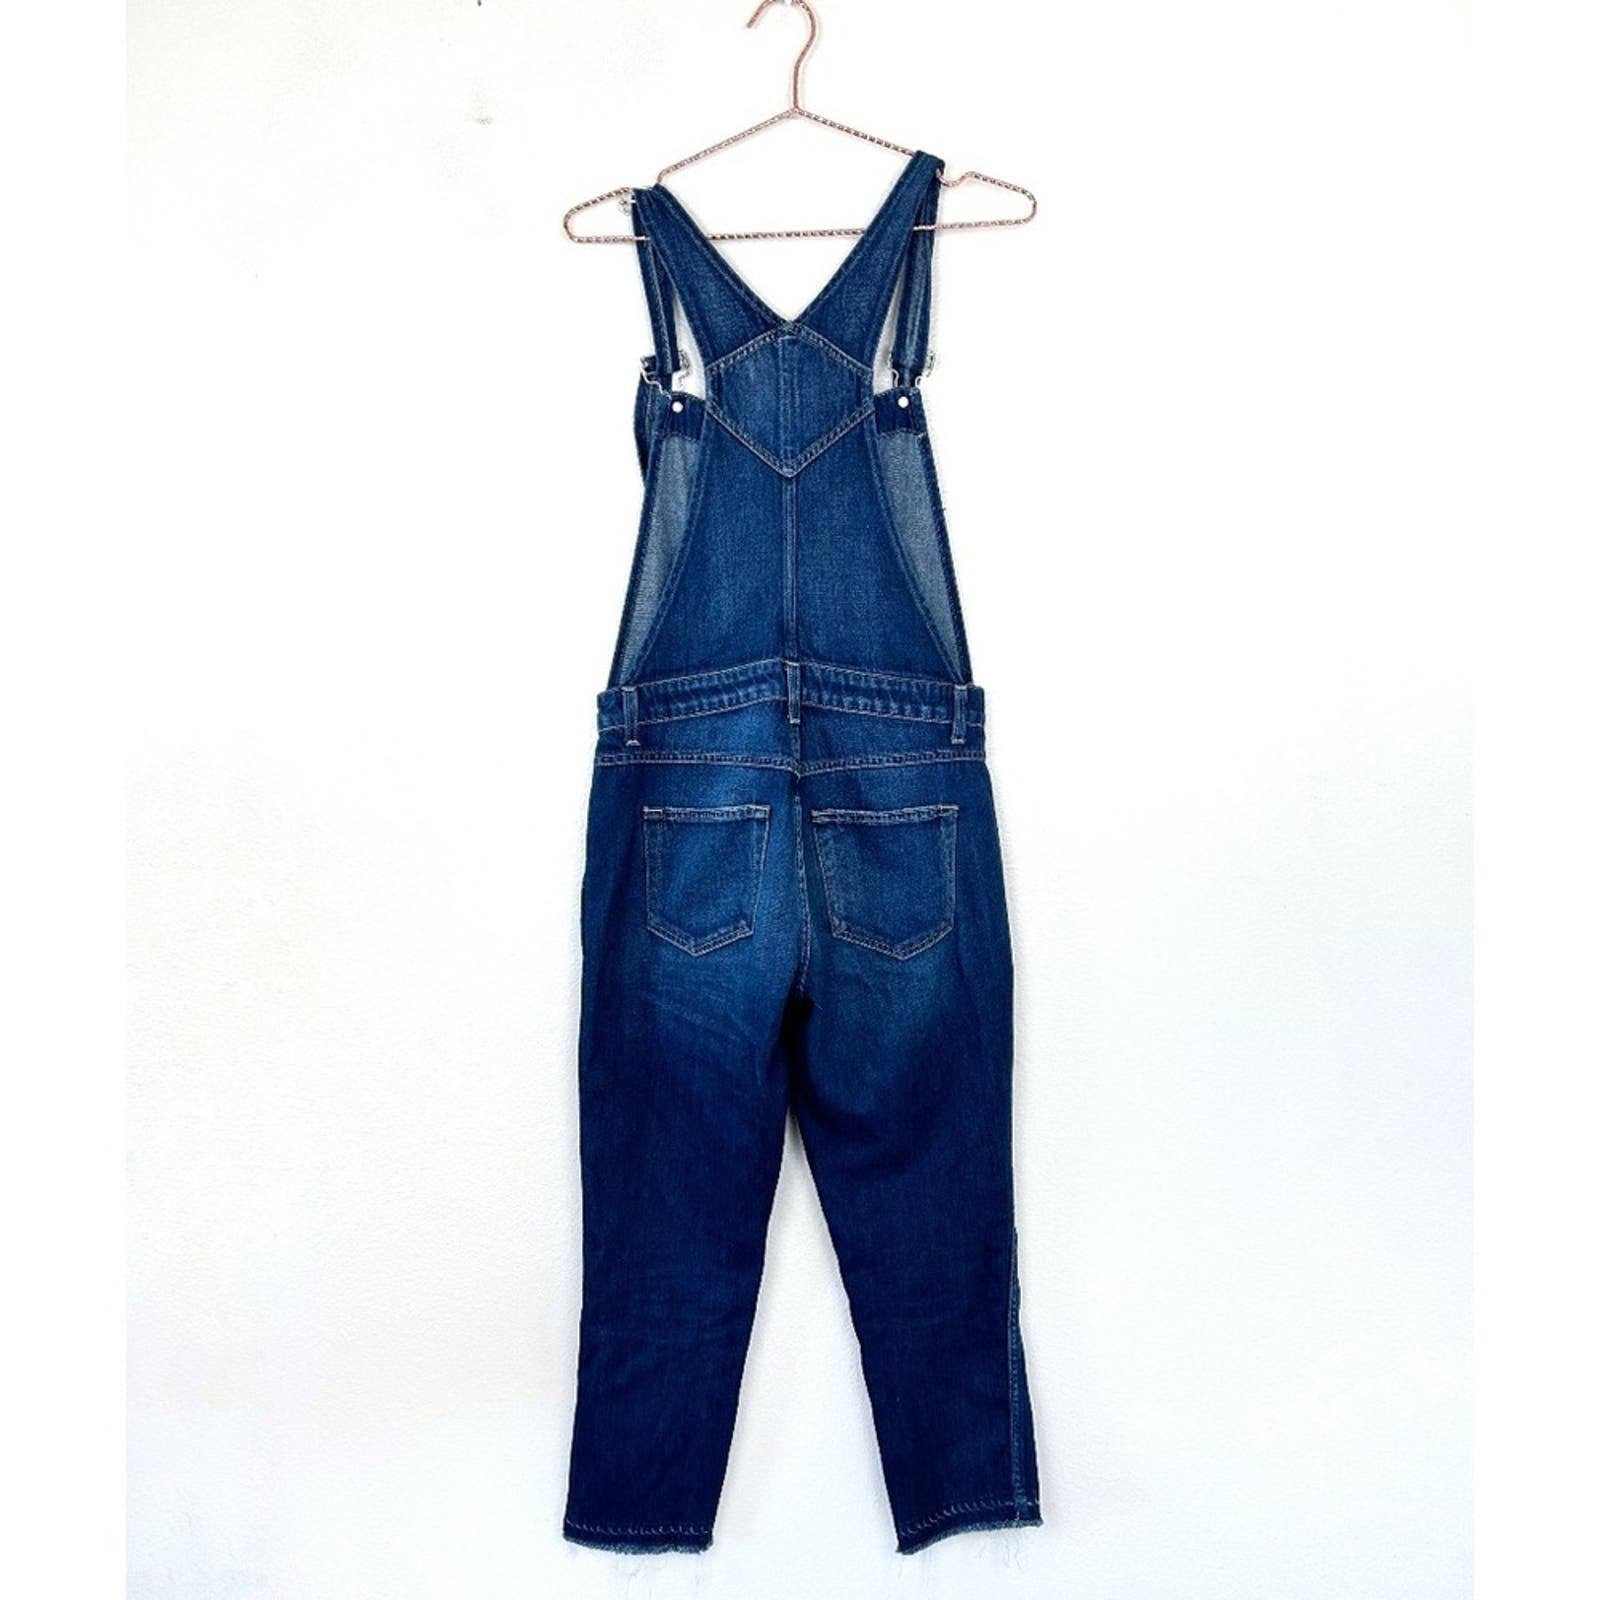 floor price AMO Babe Denim Cotton Overalls in True Blue pIGk9CCYn just for you